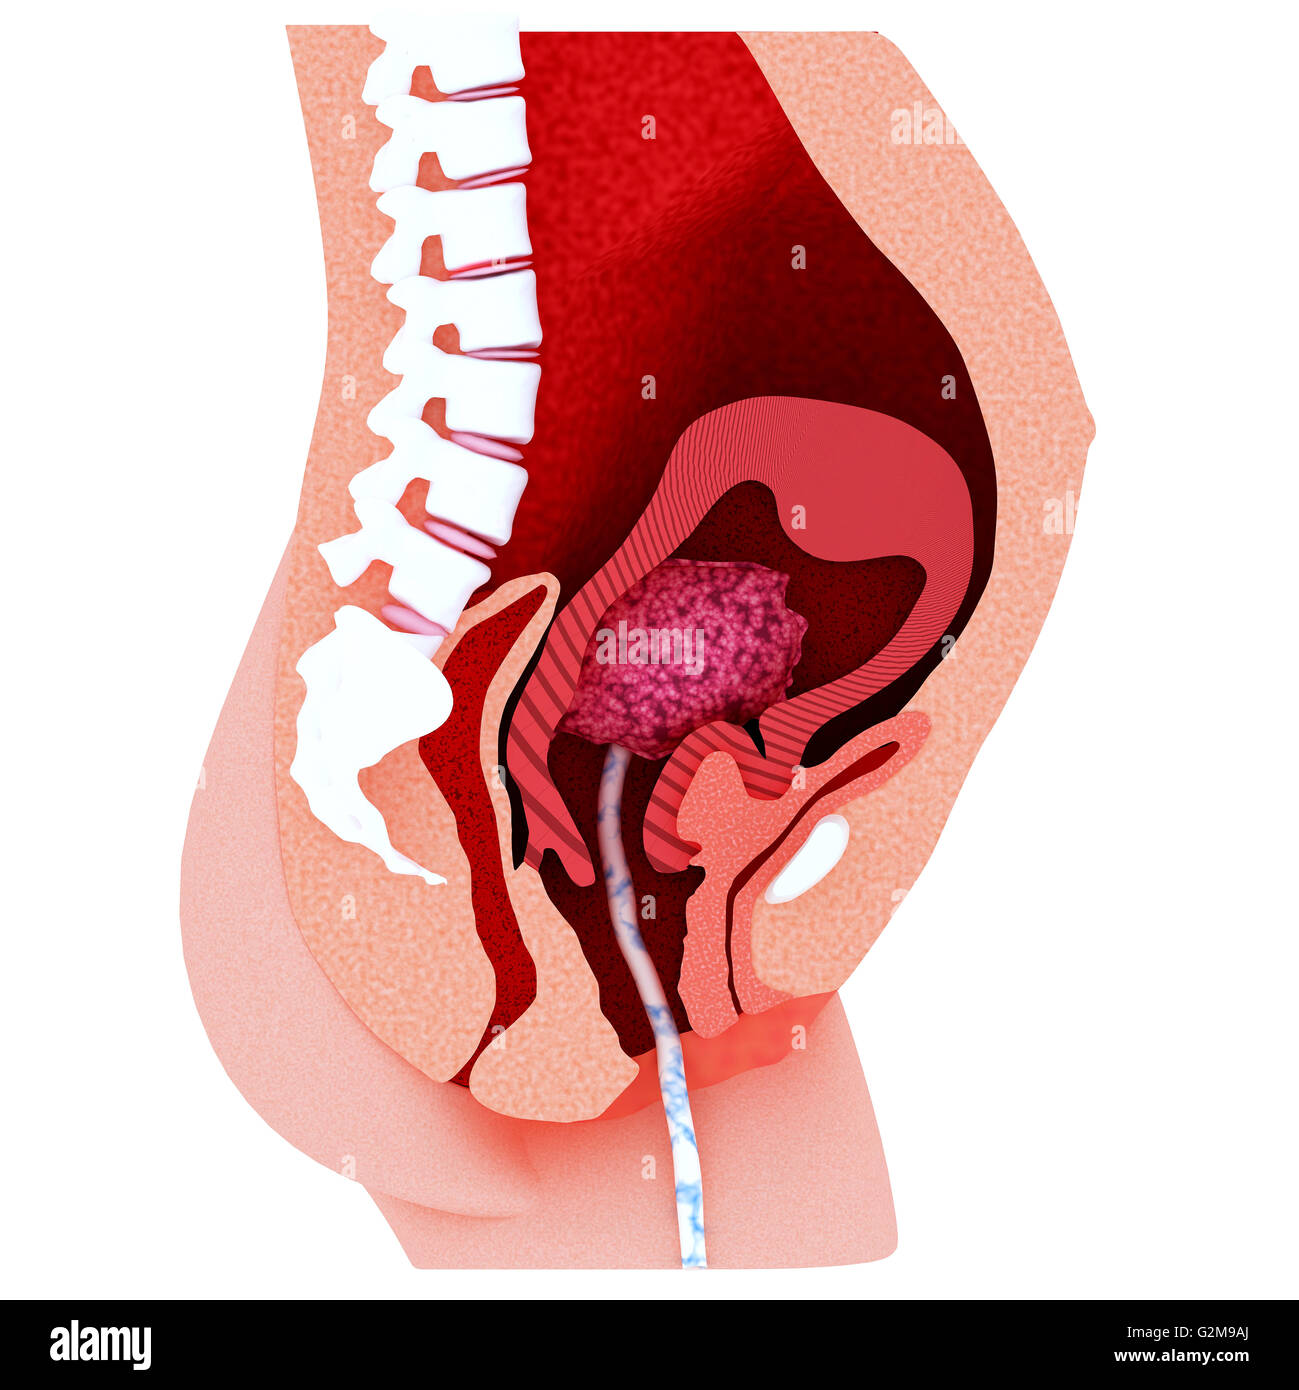 Cross section of uterus with umbilical cord Stock Photo